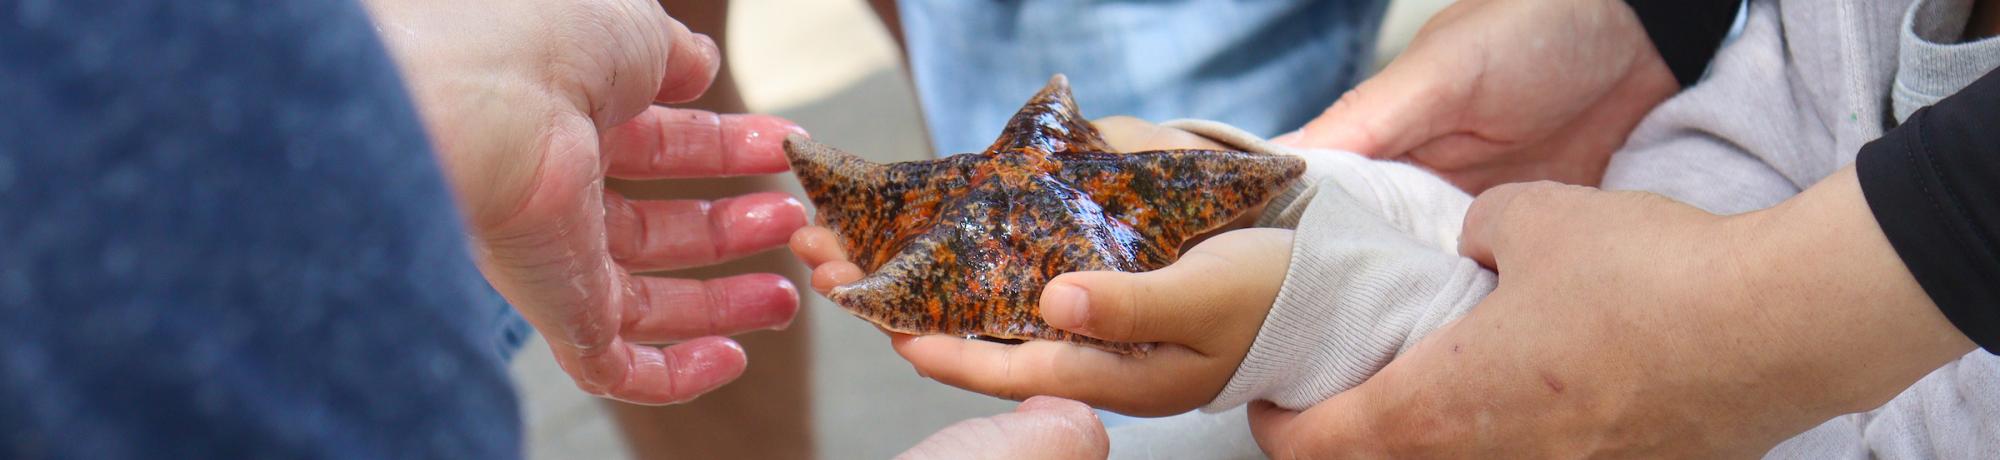 A young child holding a mottled orange and dark brown sea star in outstretched hands, while adult hands reach in to steady their hands.